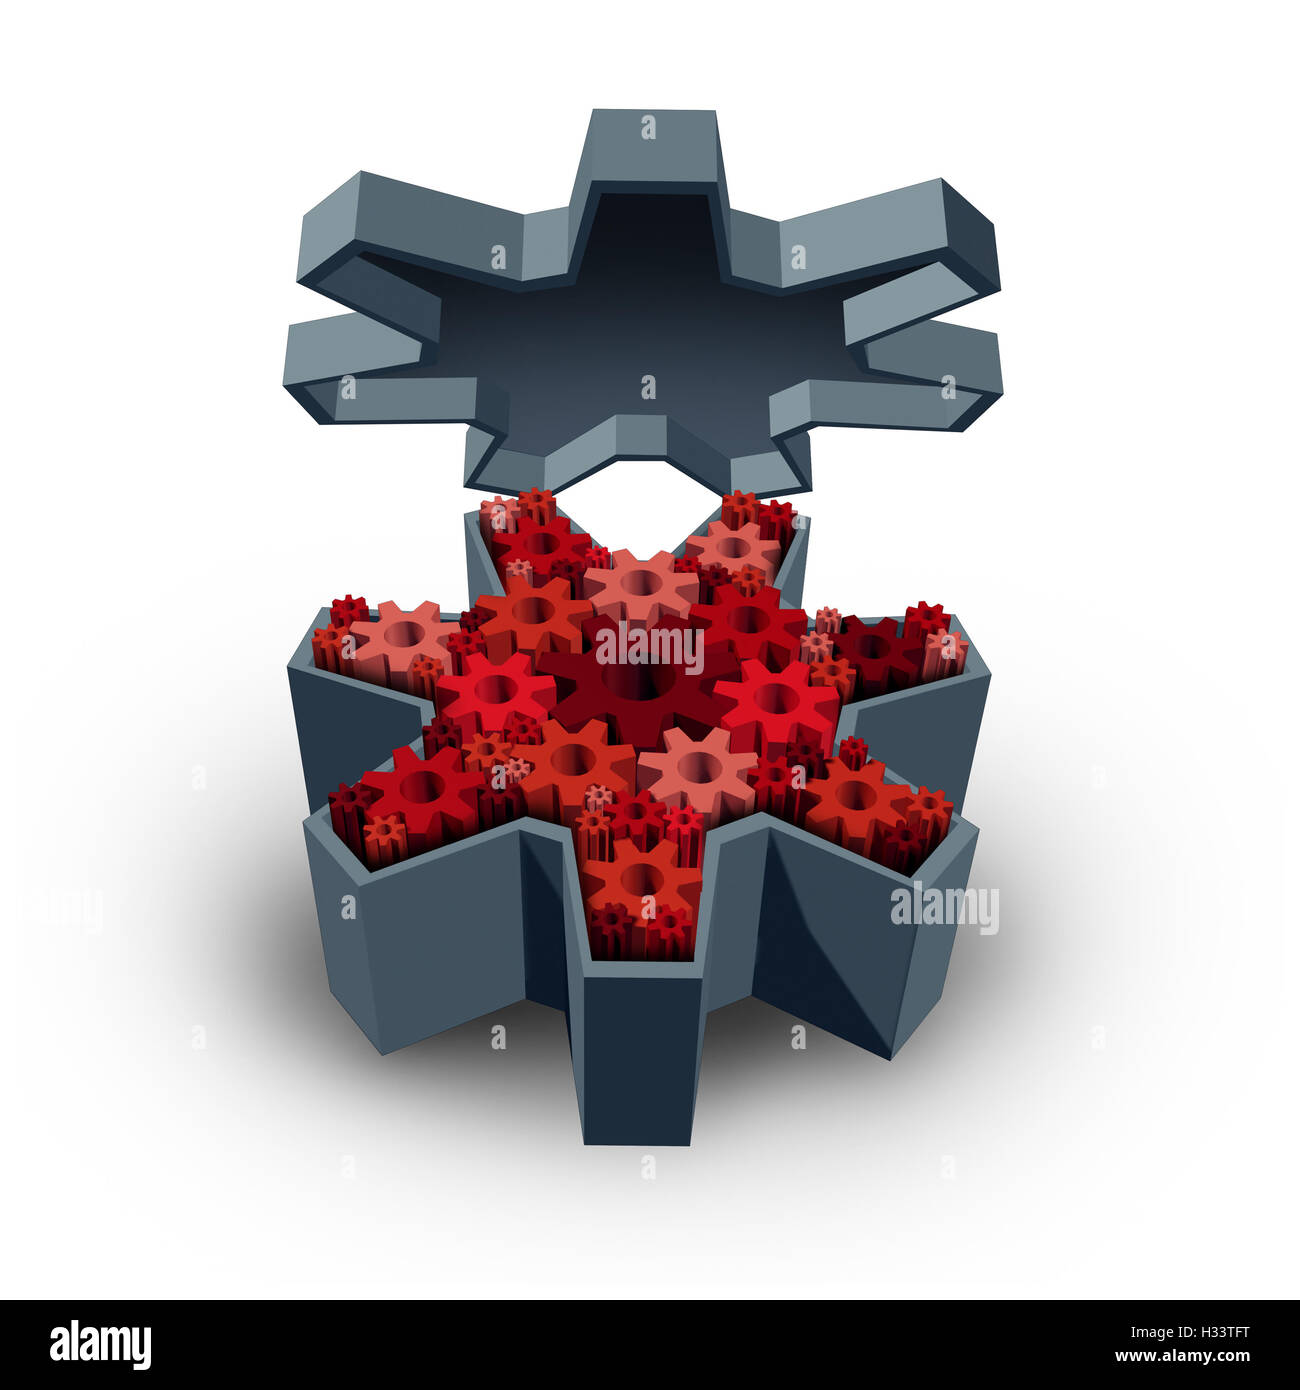 Business audit and financial accounting inner workings exposed concept as a large open gear exposing the internal mechanics of a company as a metaphor for auditing or corporate verification as a 3D illustration. Stock Photo